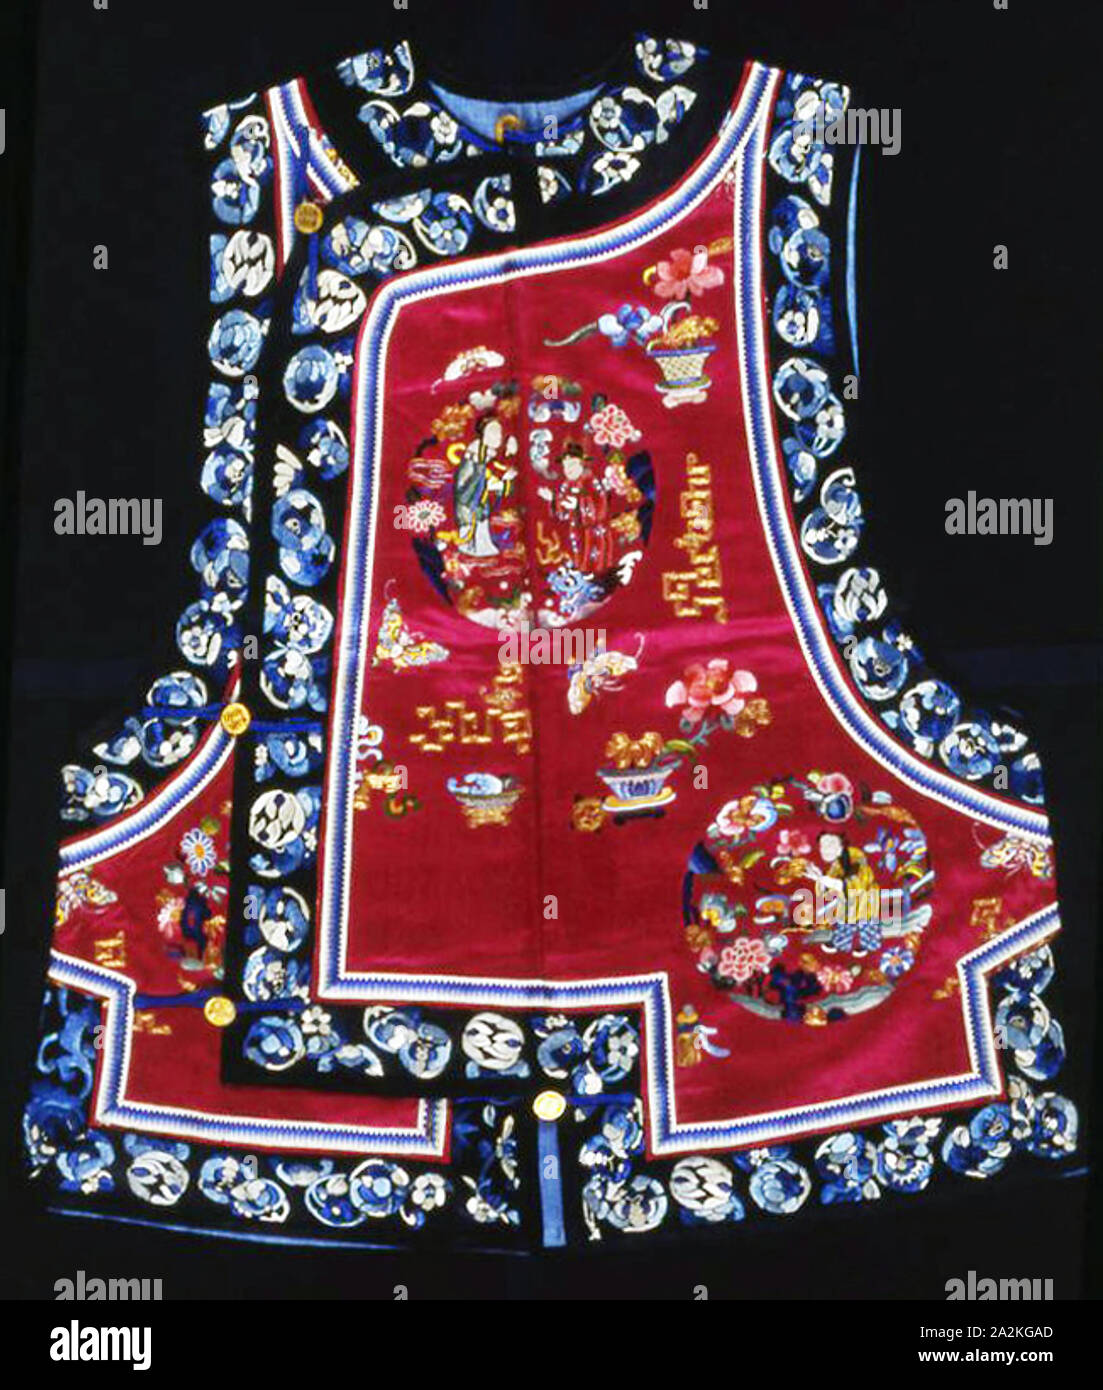 Woman’s Vest, Qing dynasty (1644–1911), 1875/1900, Manchu, China, Silk, warp-float faced 7:1 satin weave, embroidered with silk and gold-leaf-over-lacquered-paper-strip-wrapped silk in satin, single satin, and stem stitches, laid work, couching and Chinese knots, inner tape: silk and cotton, plain weave self-patterned by main warp floats, outer tape: silk, warp-float faced 7:1 satin weave, embroidered with silk in satin and stem stitches, edged with silk, warp-float faced 7:1 satin weave, lined with silk, plain weave, button loops: silk, warp-float faced 7:1 satin weave, metal buttons, 64 × 57 Stock Photo